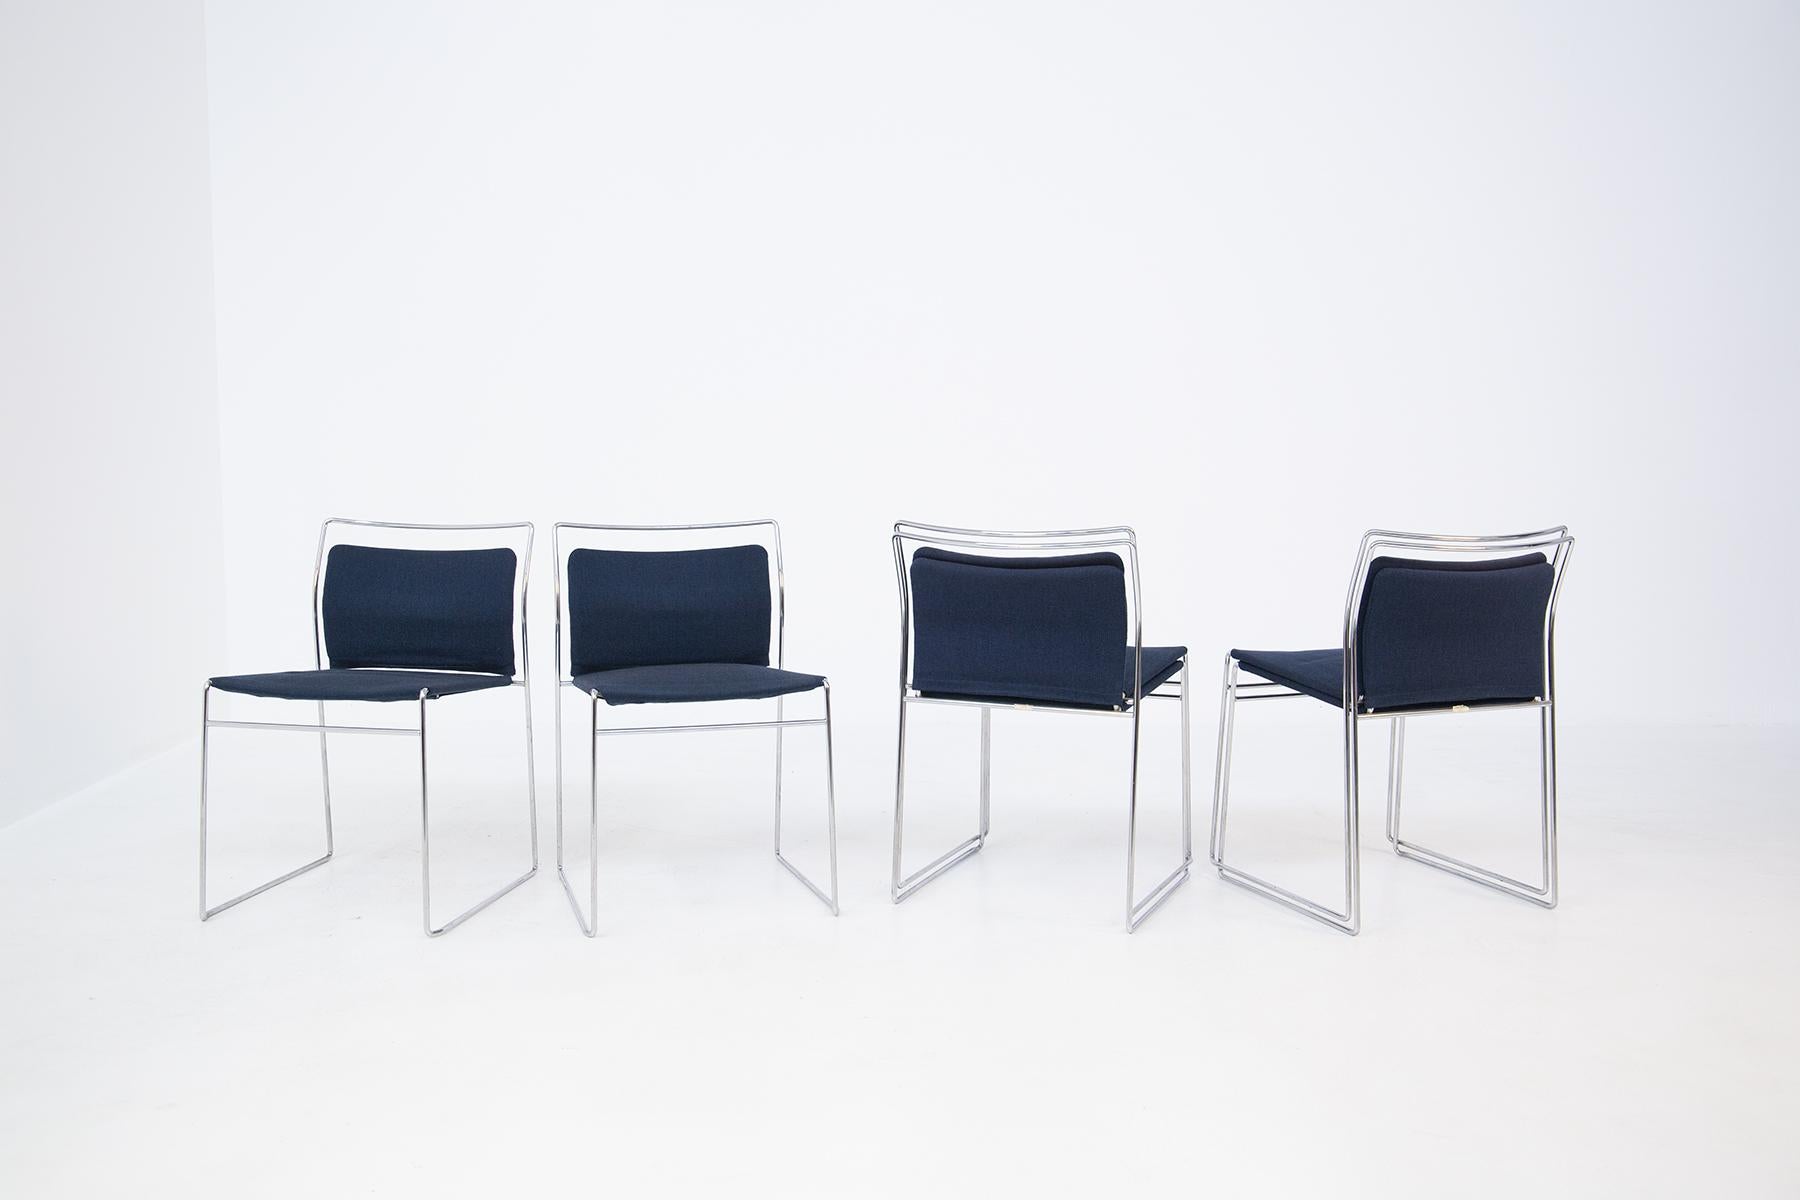 Beautiful set consisting of twelve chairs designed by the great designer Kazuhide Takahama for Gavina manufactory in the 1970s.
The wonderful chairs by Kazuhide Takahama were made with tubular steel for the frame, while fine cotton fabric in ocean